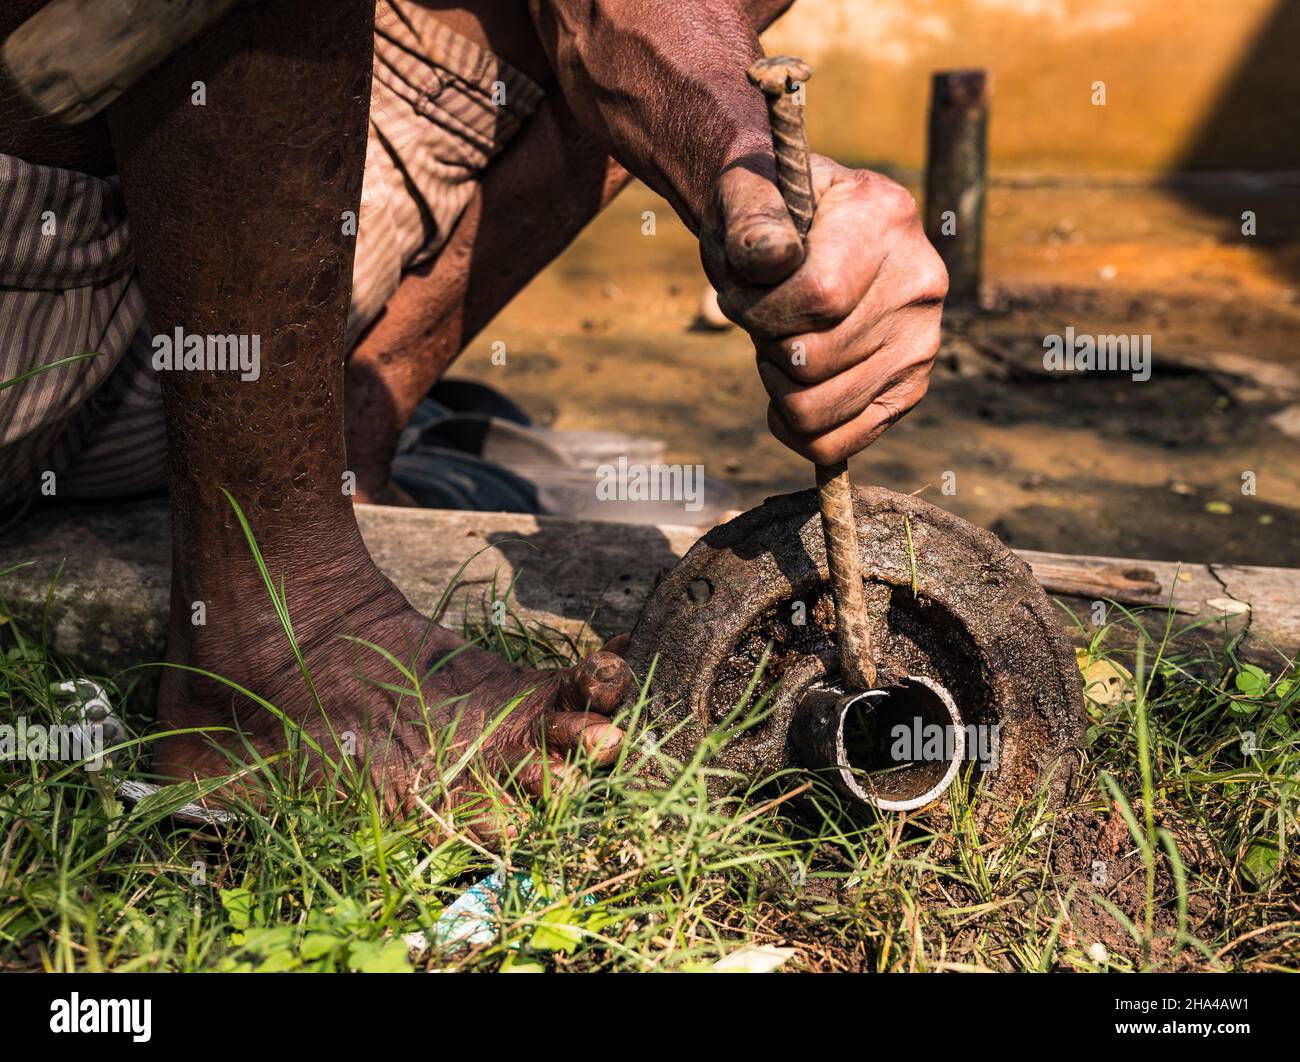 Tehatta, West Bengal, India. 8th Dec, 2021. A recent report published by the Reserve Bank of India (RBI) shows that the daily wage of rural workers in West Bengal is way below the national average. A worker is repairing a tubewell (hand pump) at Tehatta, West Bengal. (Credit Image: © Soumyabrata Roy/Pacific Press via ZUMA Press Wire) Stock Photo